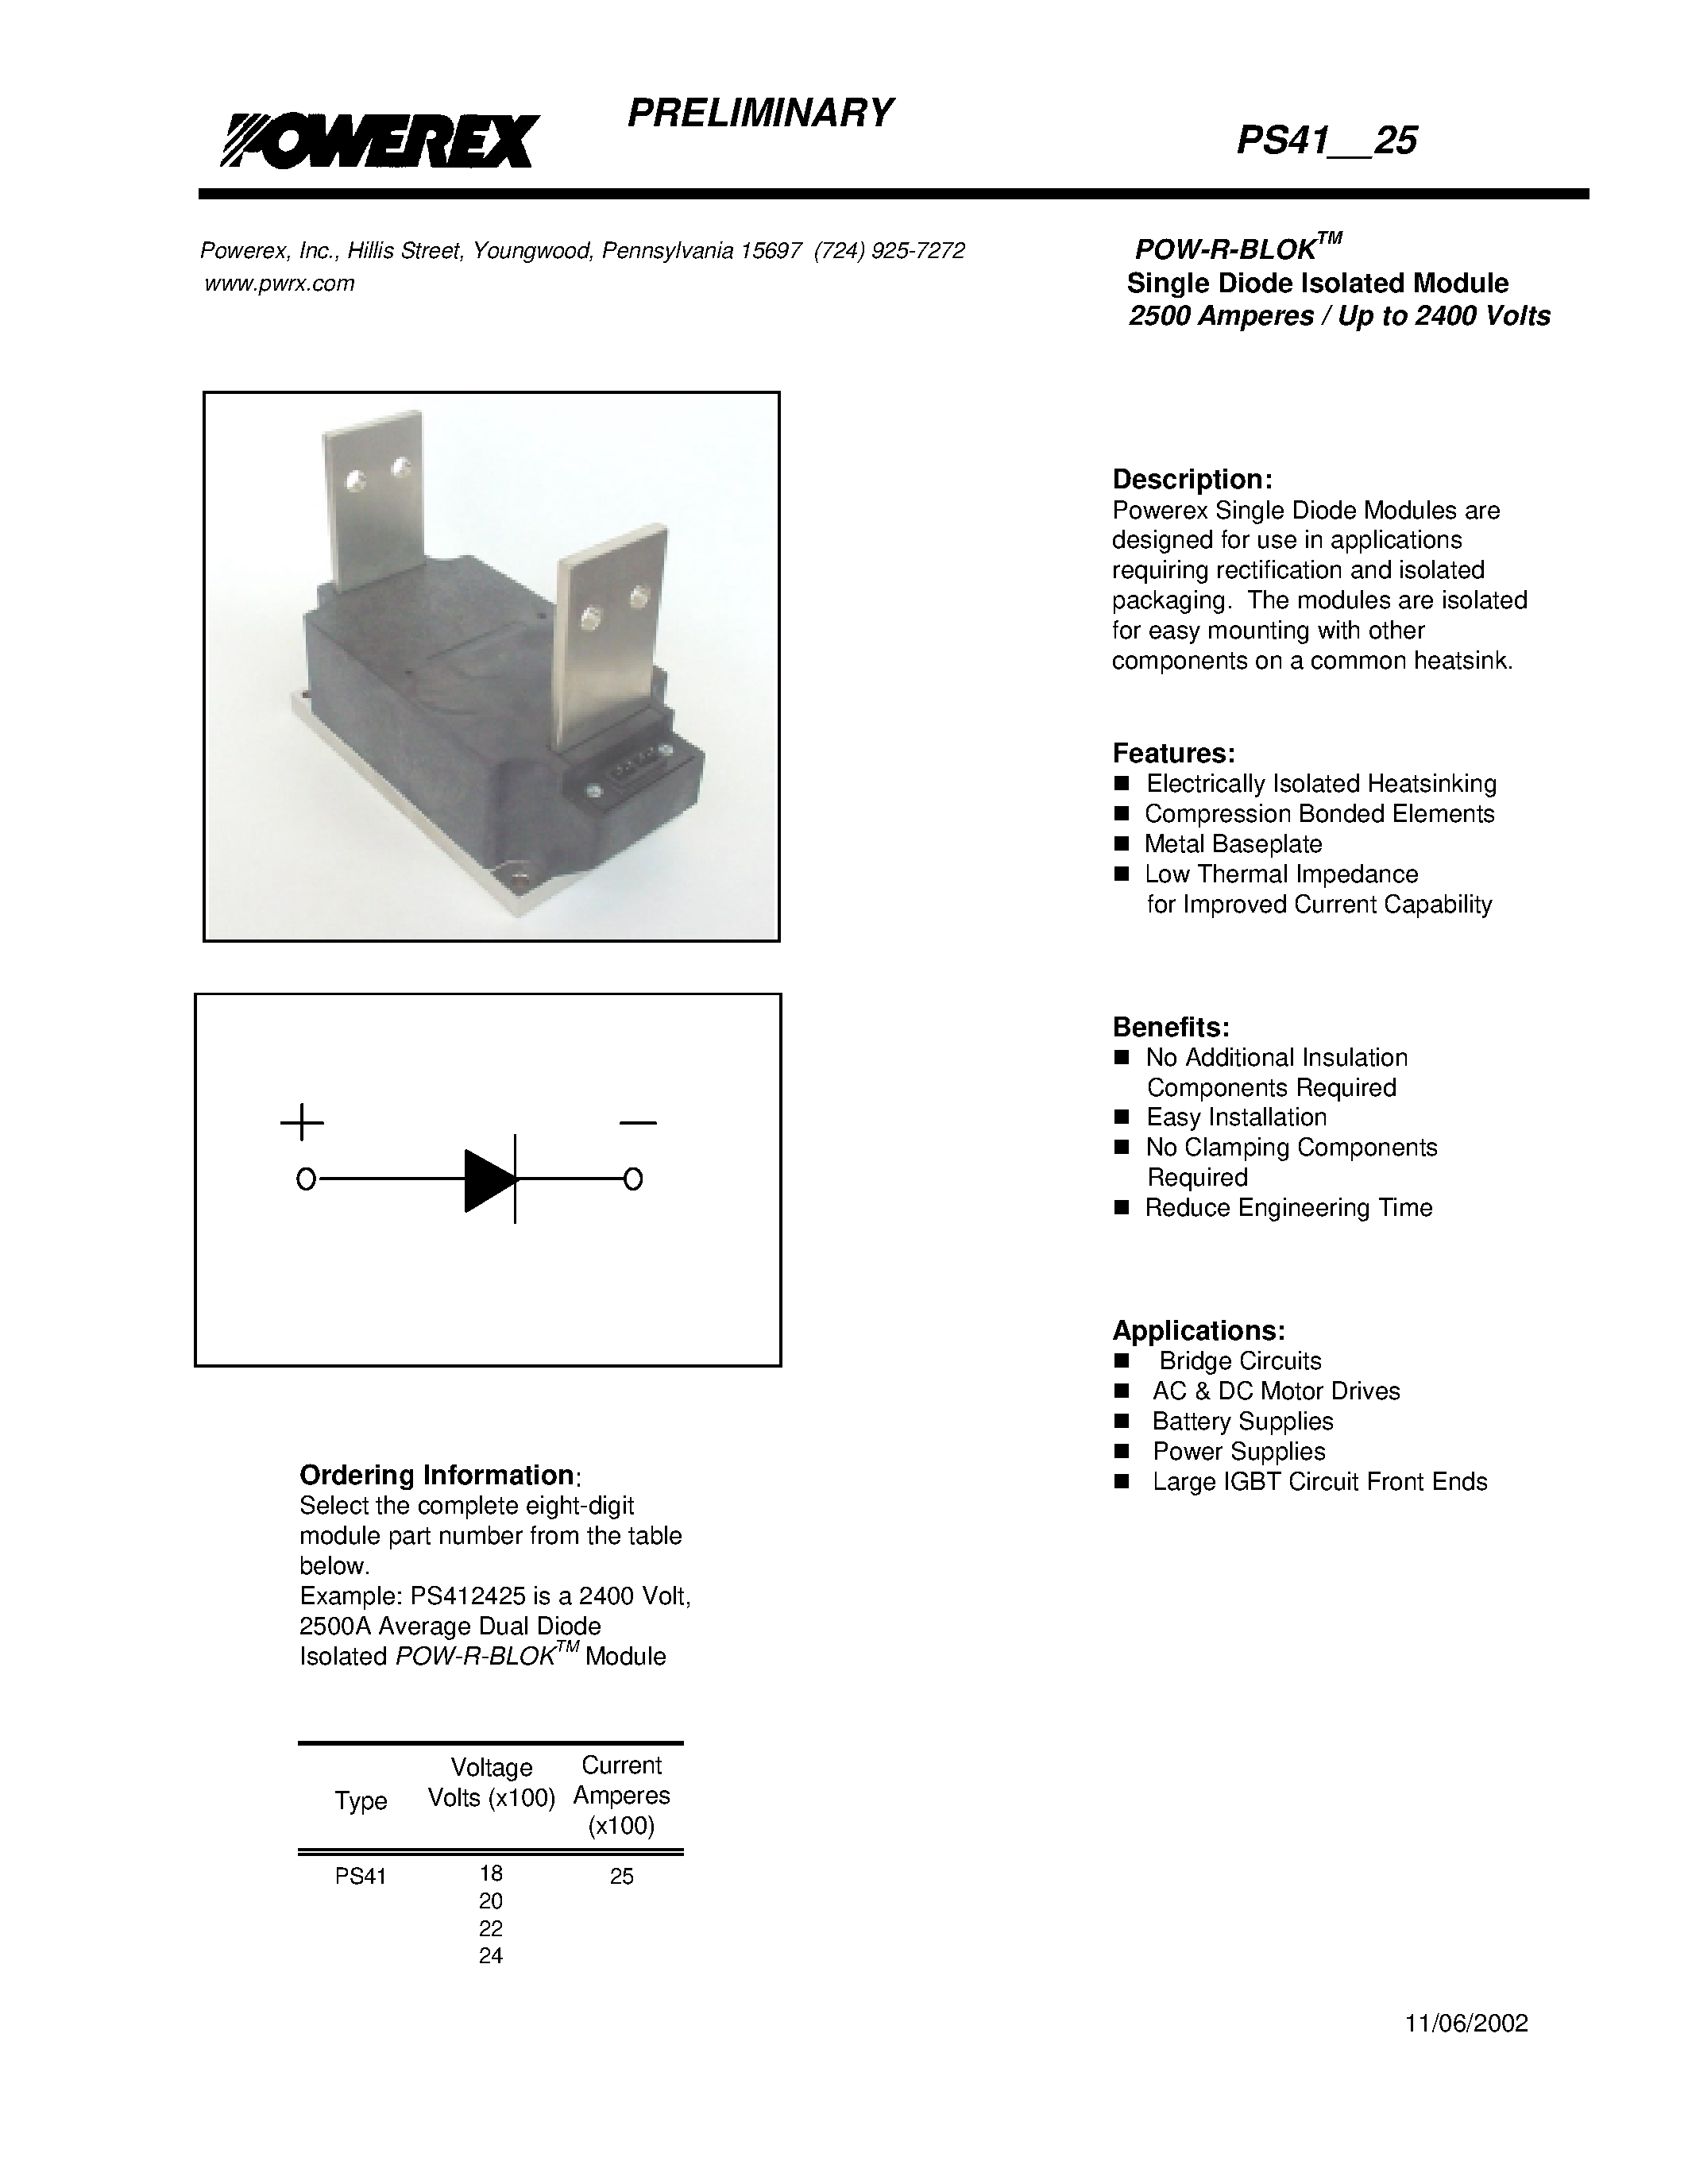 Datasheet P412225 - POW-R-BLOK Single Diode Isolated Module (2500 Amperes / Up to 2400 Volts) page 1